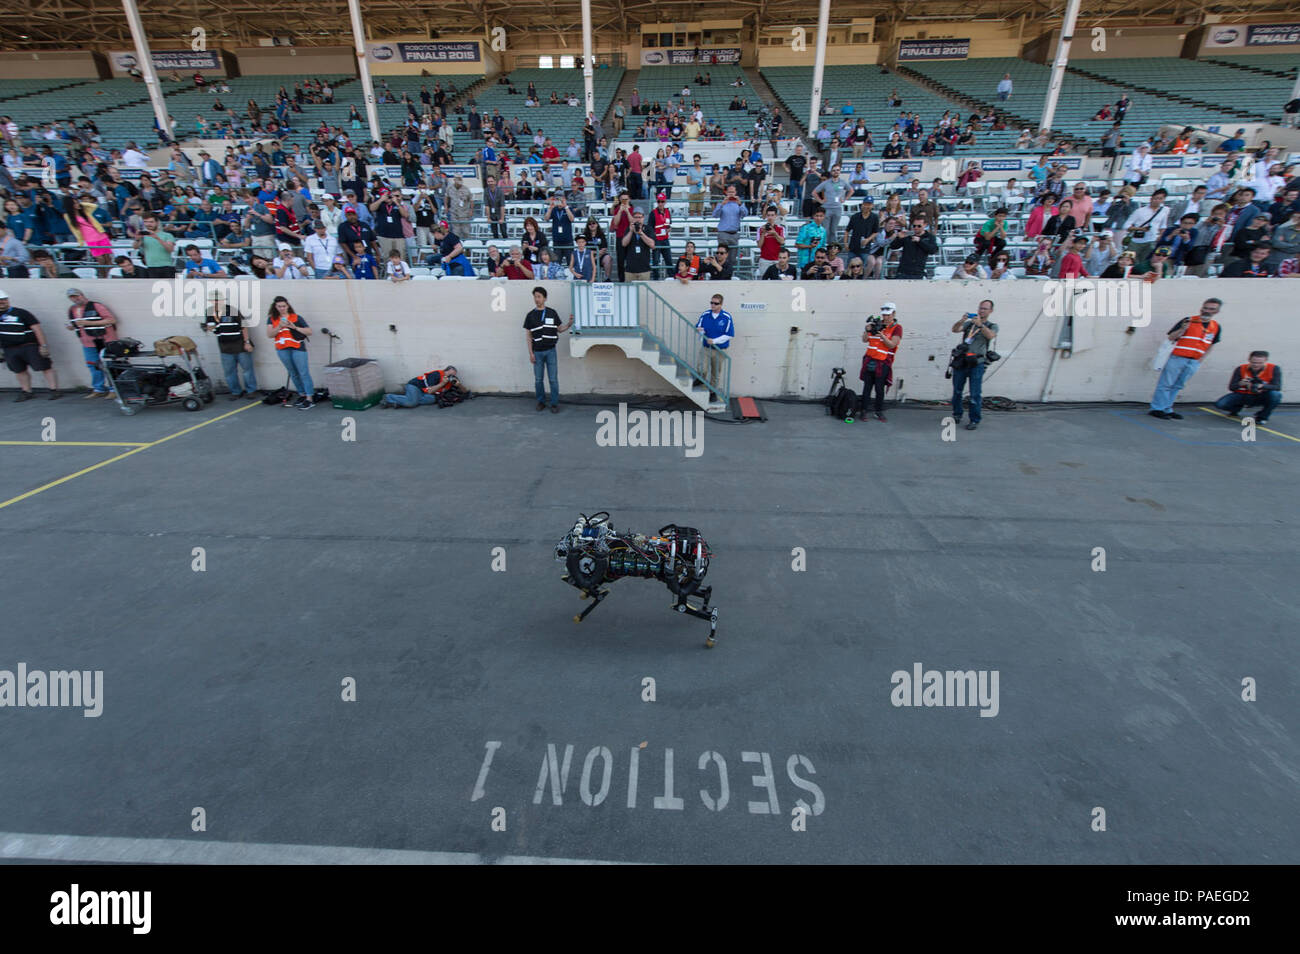 POMONA, California (June 5, 2015) The Massachusetts Institute of Technology (MIT) robotic cheetah entertains the crowd in between competition rounds during the Defense Advanced Research Projects Agency (DARPA) Robotics Challenge (DRC) June 6, 2015, at Fairplex in Pomona, Calif. MIT researchers have trained the robot to see and jump over hurdles as it runs — making this the first four-legged robot to run and jump over obstacles autonomously. Stock Photo